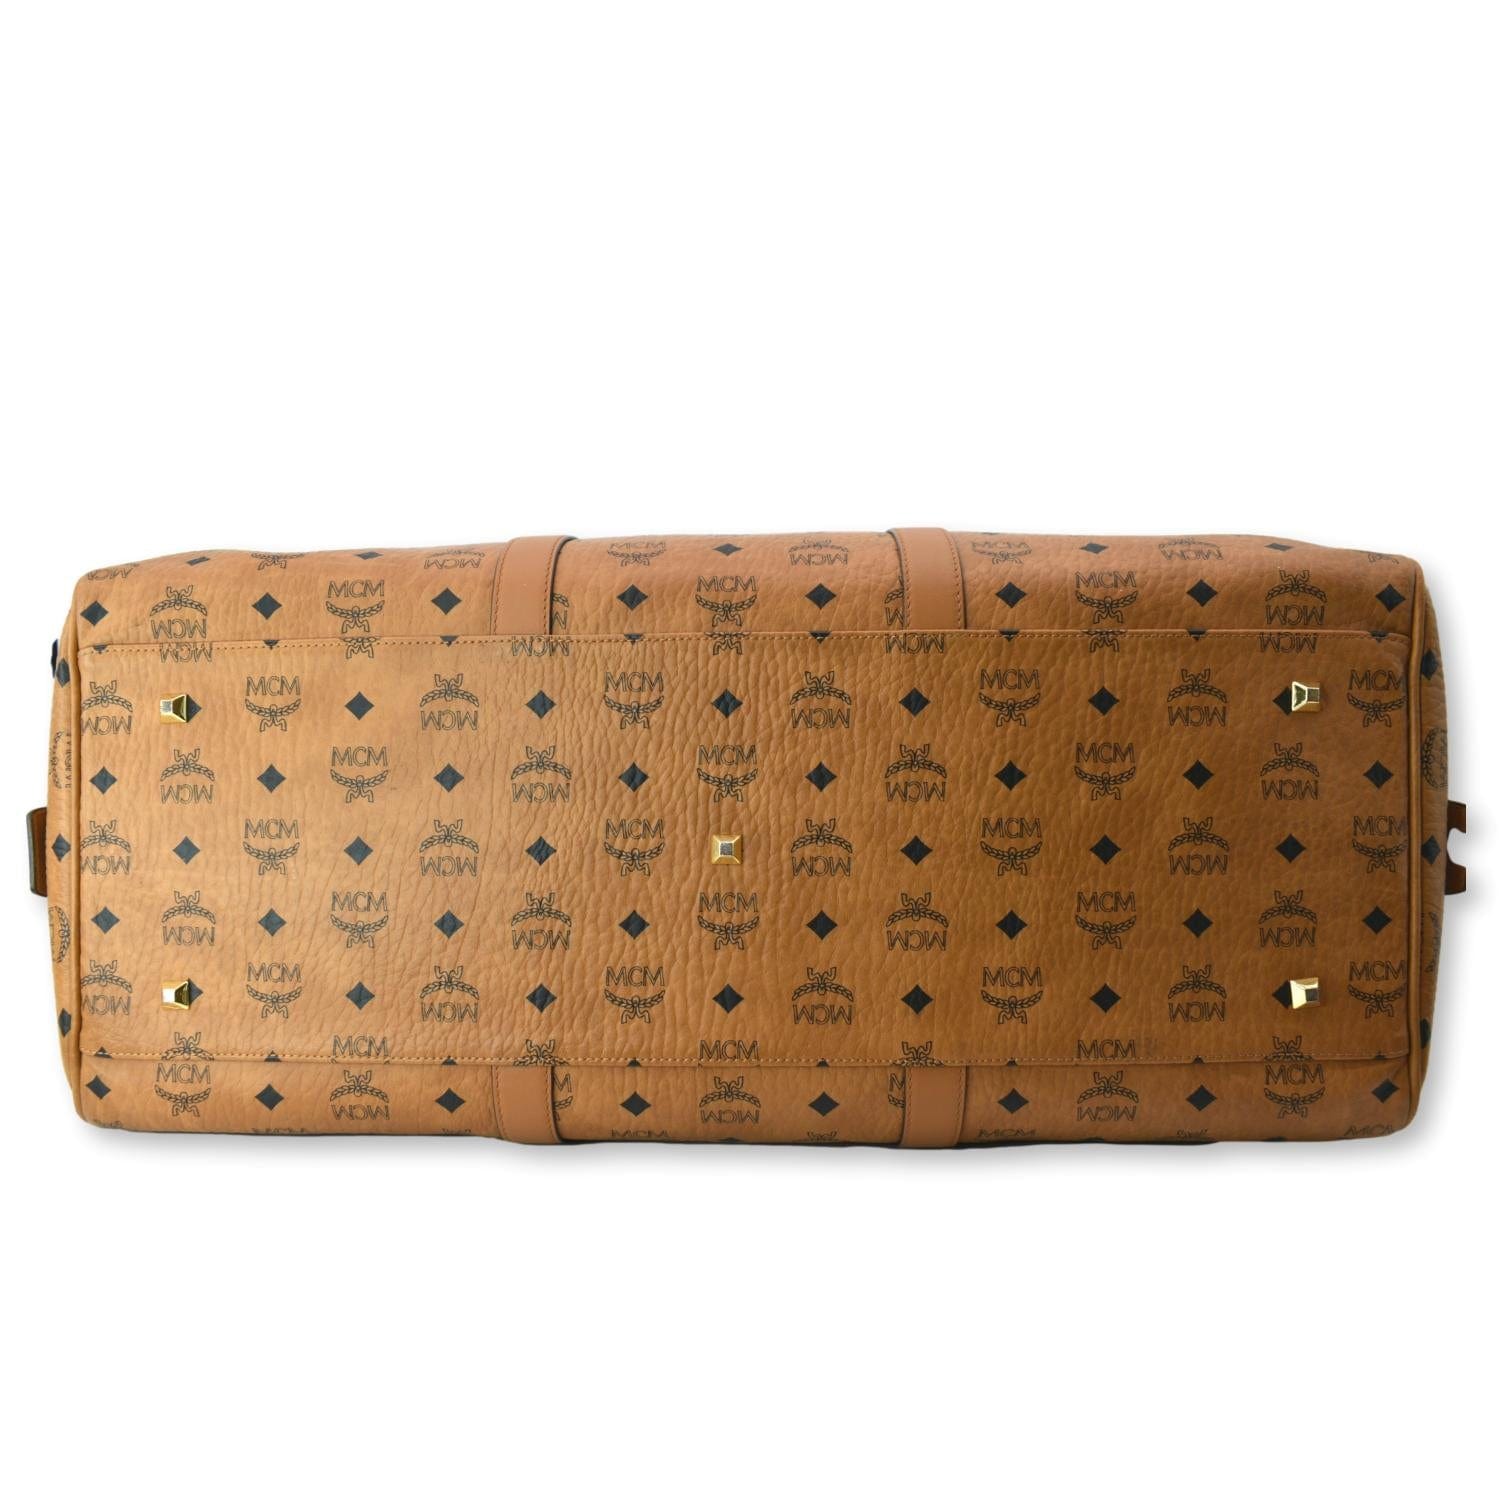 Mcm Travel Bag Brown Coated Canvas